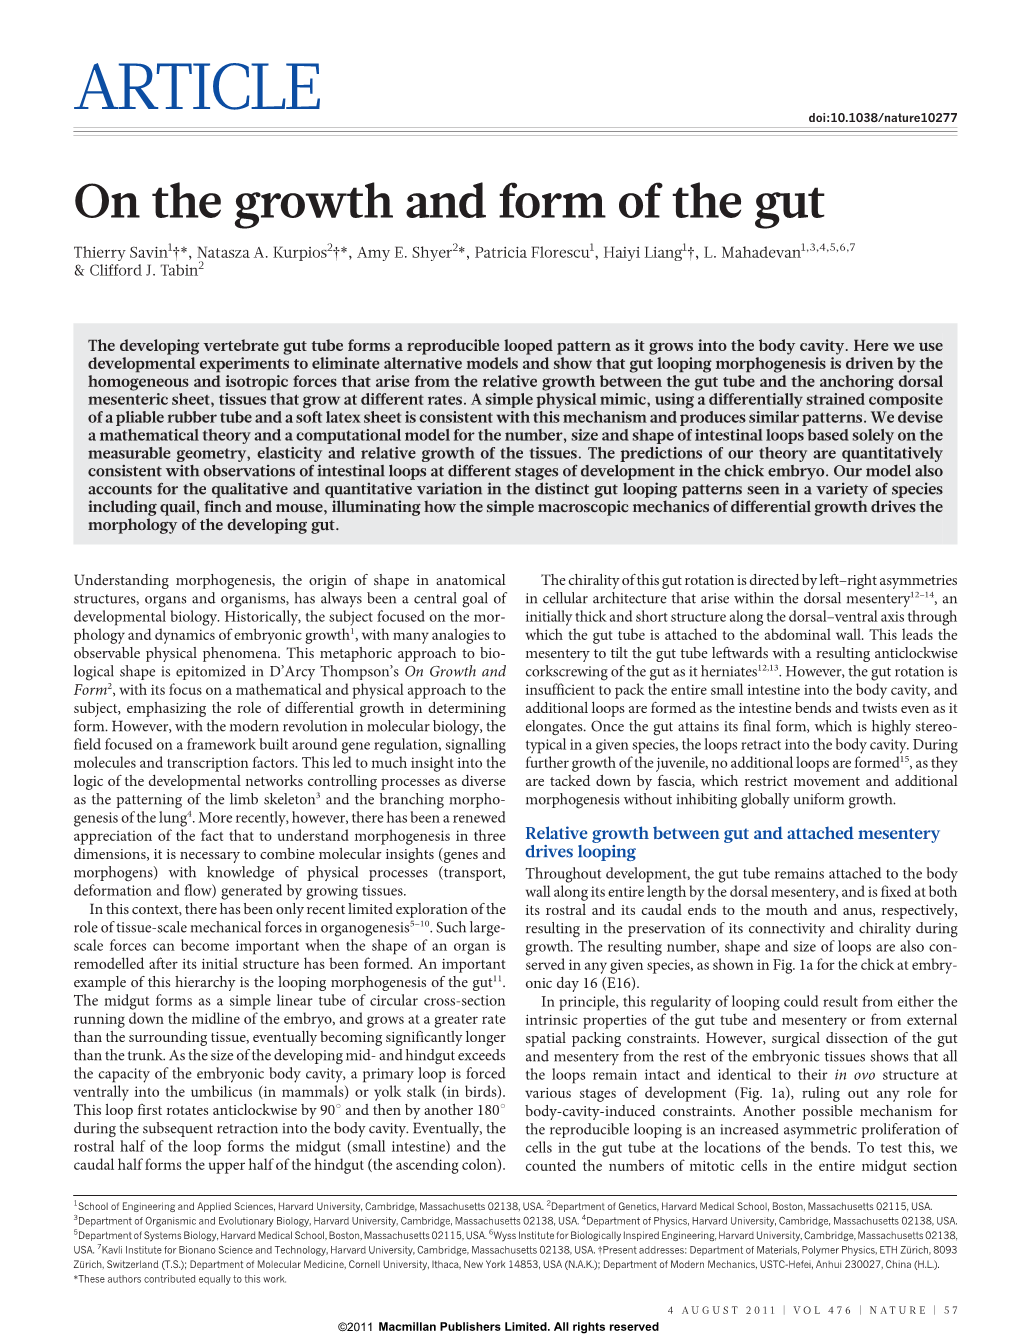 On the Growth and Form of the Gut